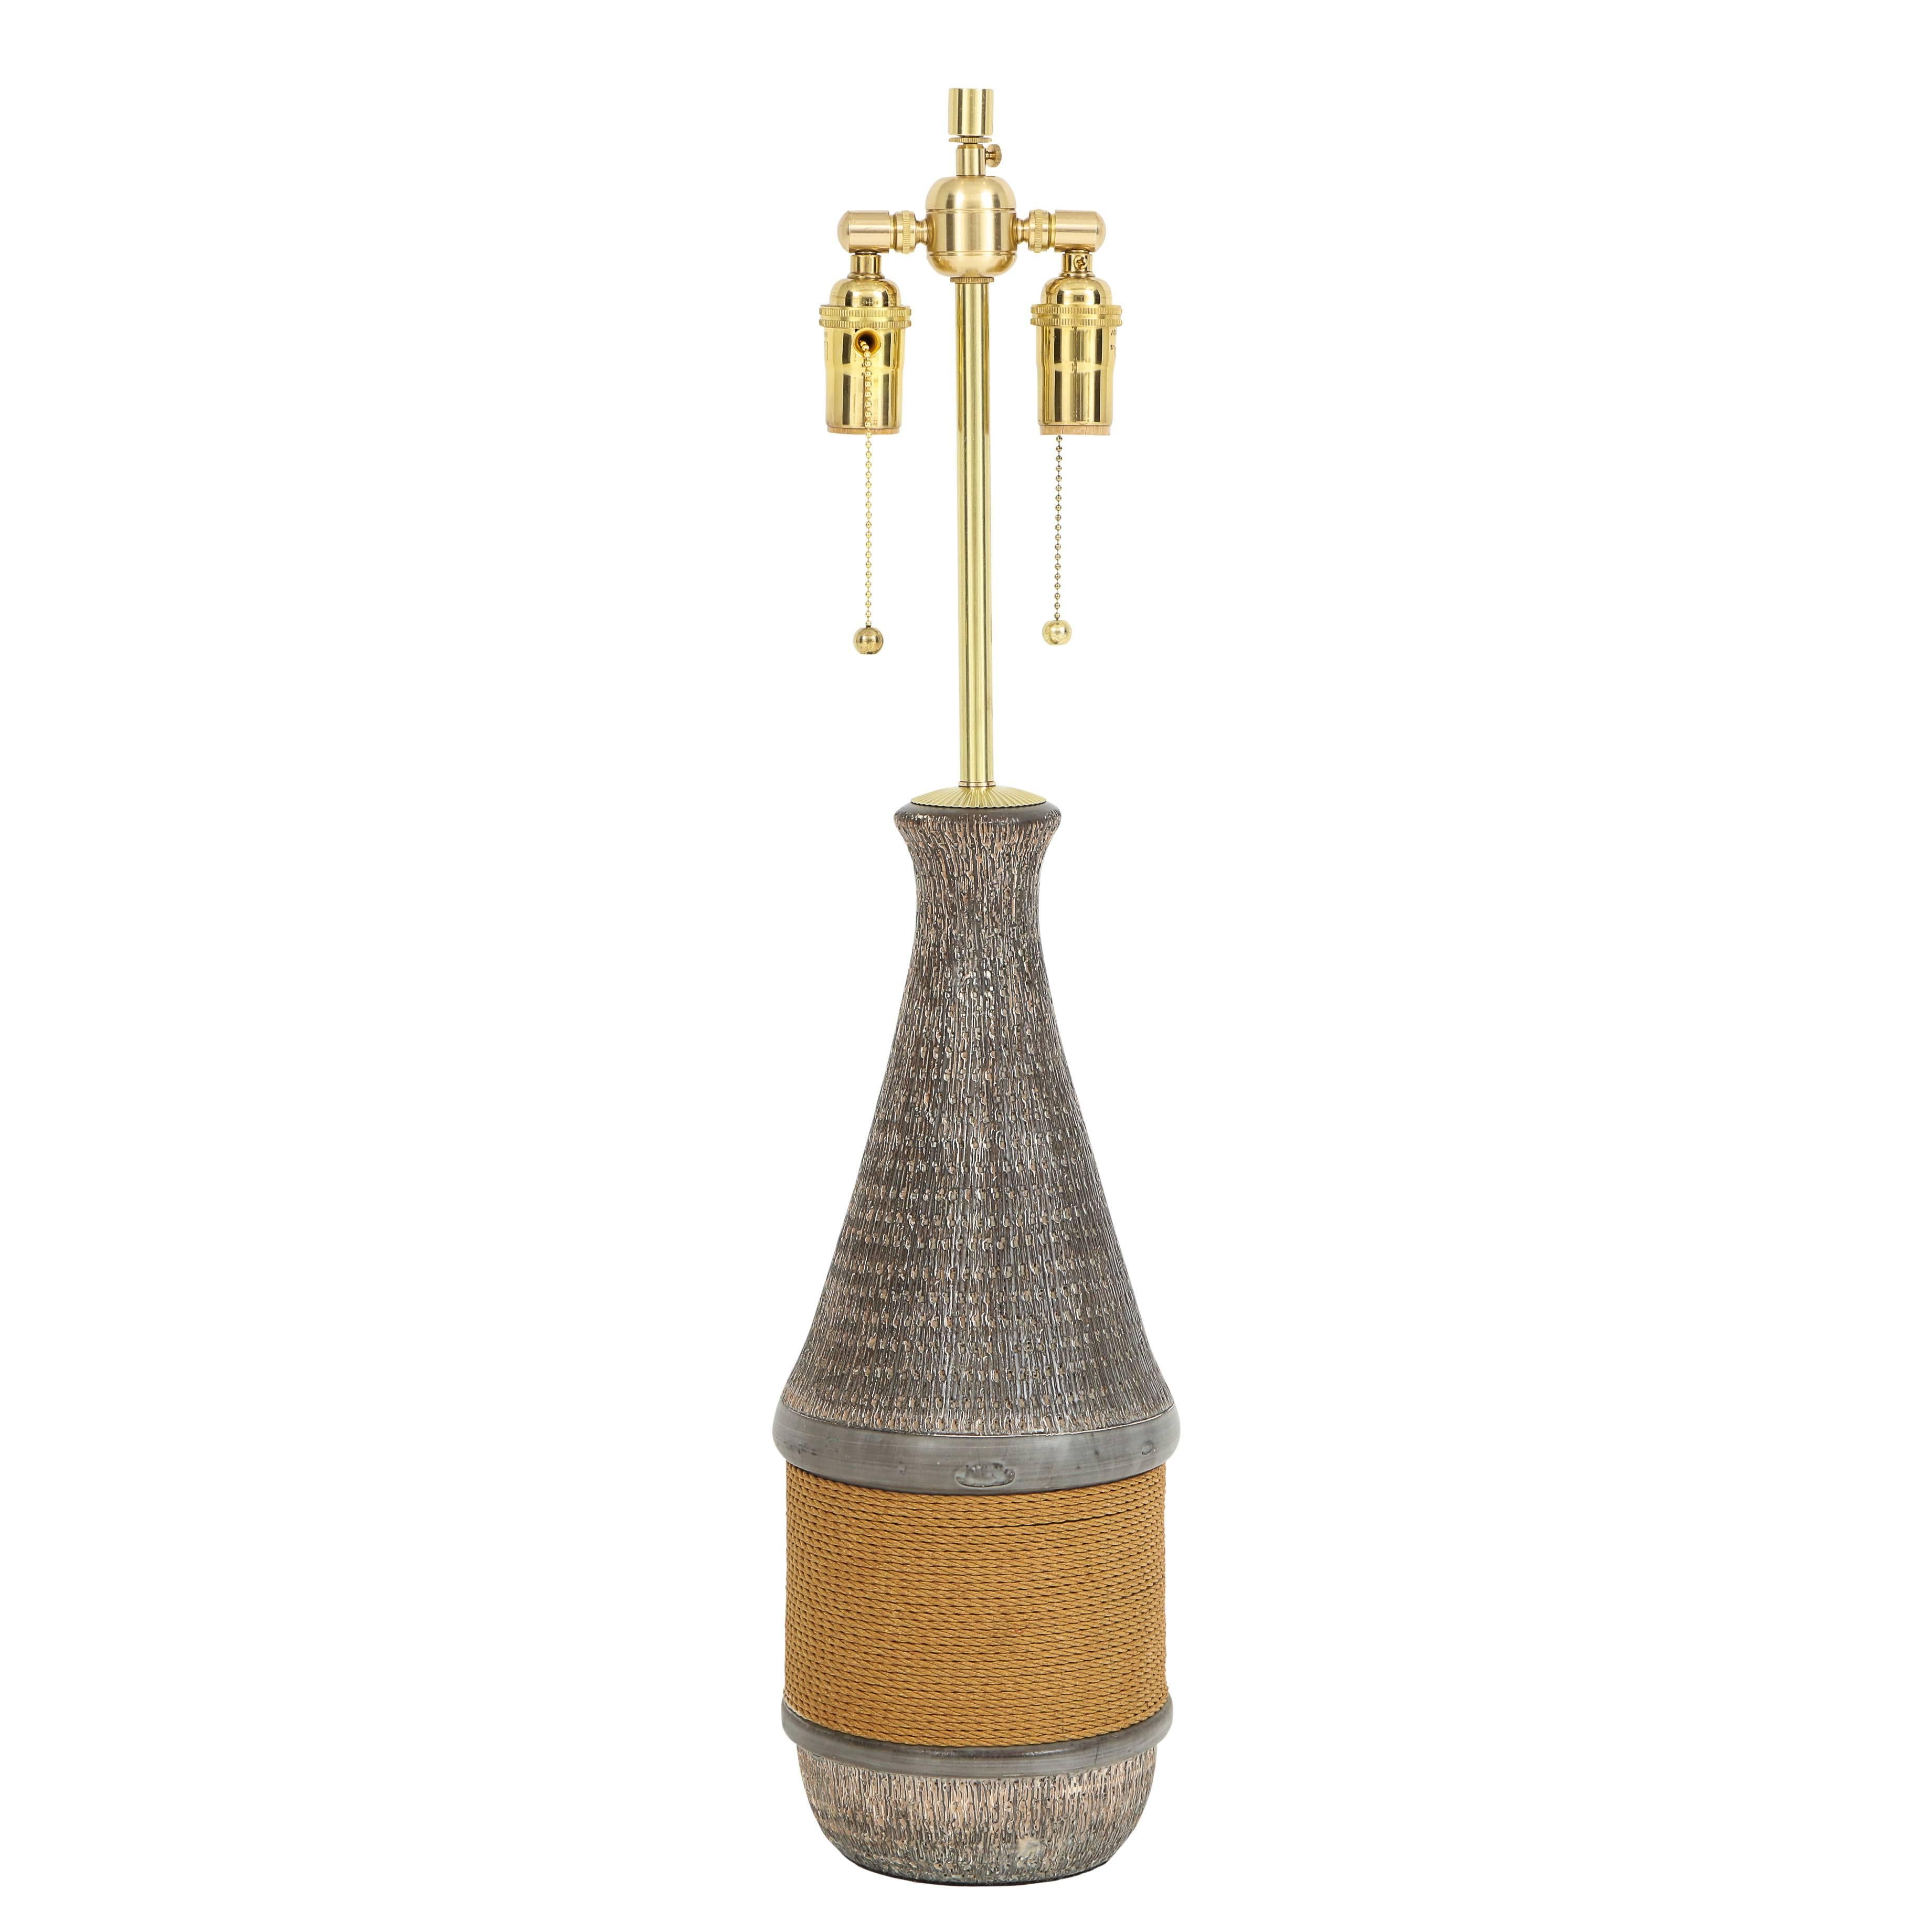 Aldo Londi Bitossi lamp, ceramic, rope, signed. Tall bottle form lamp with dark eggplant color glaze with a coarse impressed pattern. The belly of the lamp is wrapped in rope. Ceramic body measures: 17.75 inches. Signed on the underside: C 102/45,